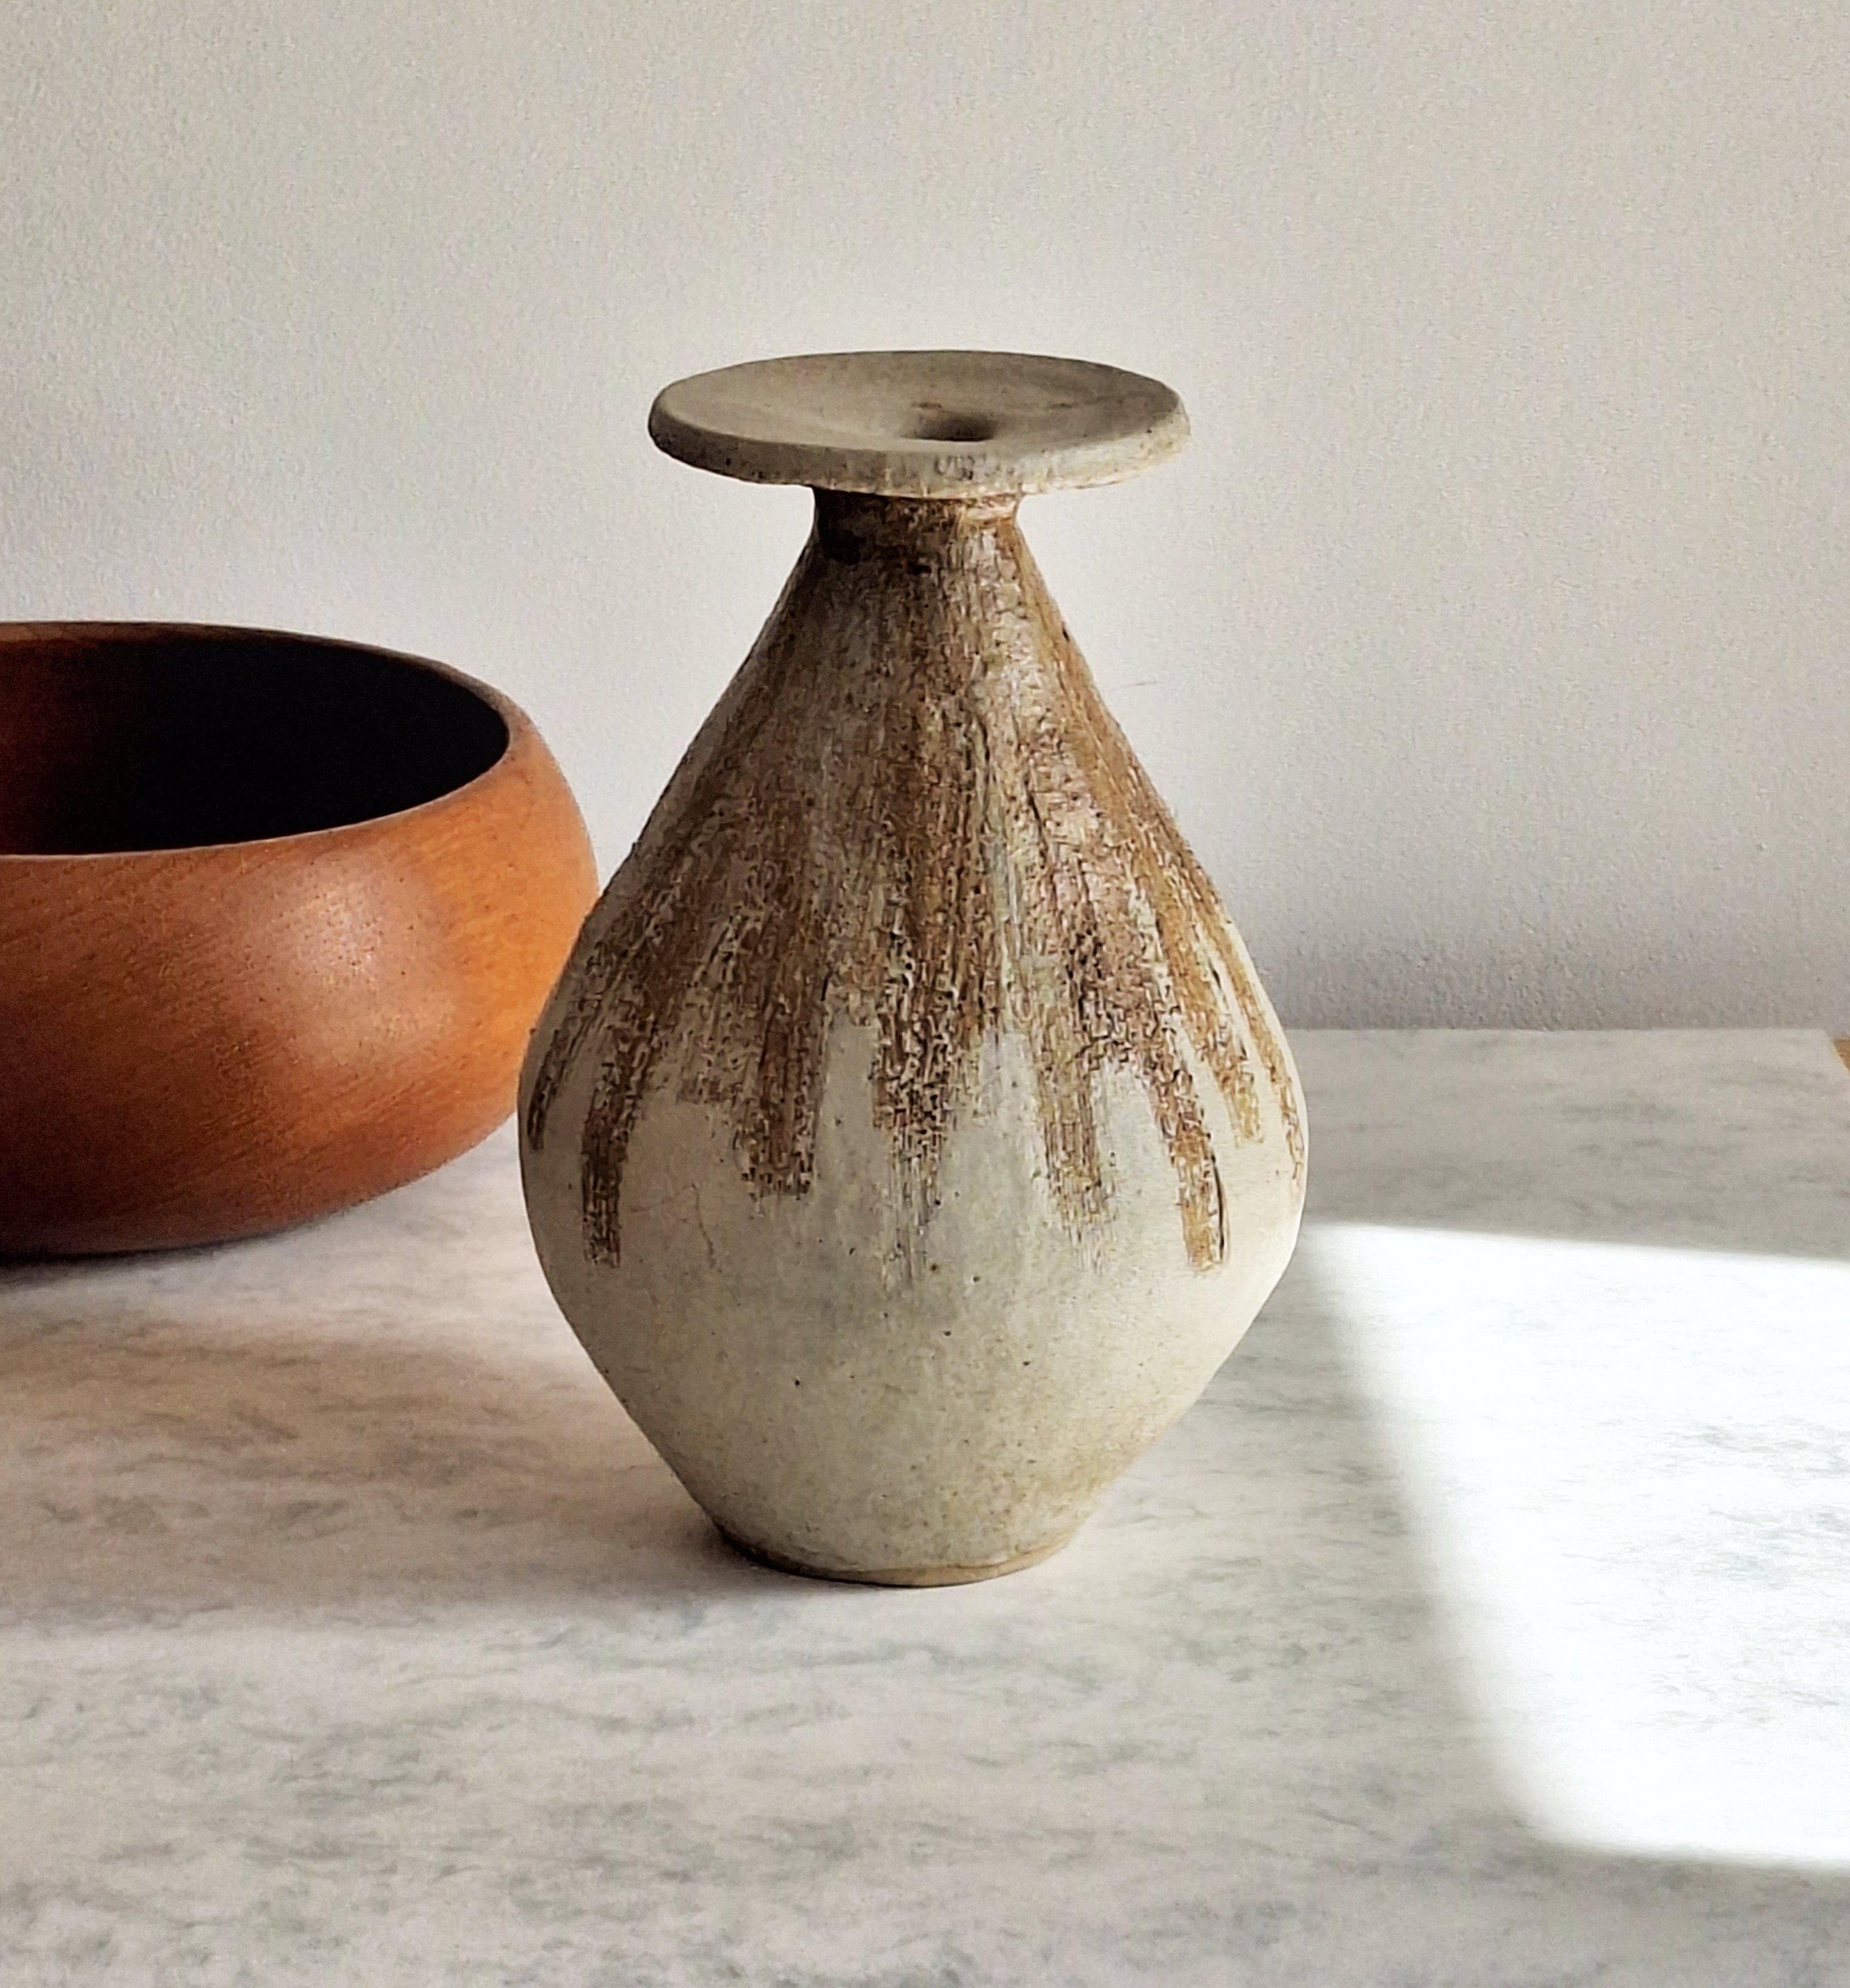 A striking stylish vintage Studio pottery vase of rounded bulbous teardrop shape in a typical Mid Century modern style, a vert elegant yet substantial piece.

This heavy rounded stoneware vase tapers upwards, finishing with a flat top that has a